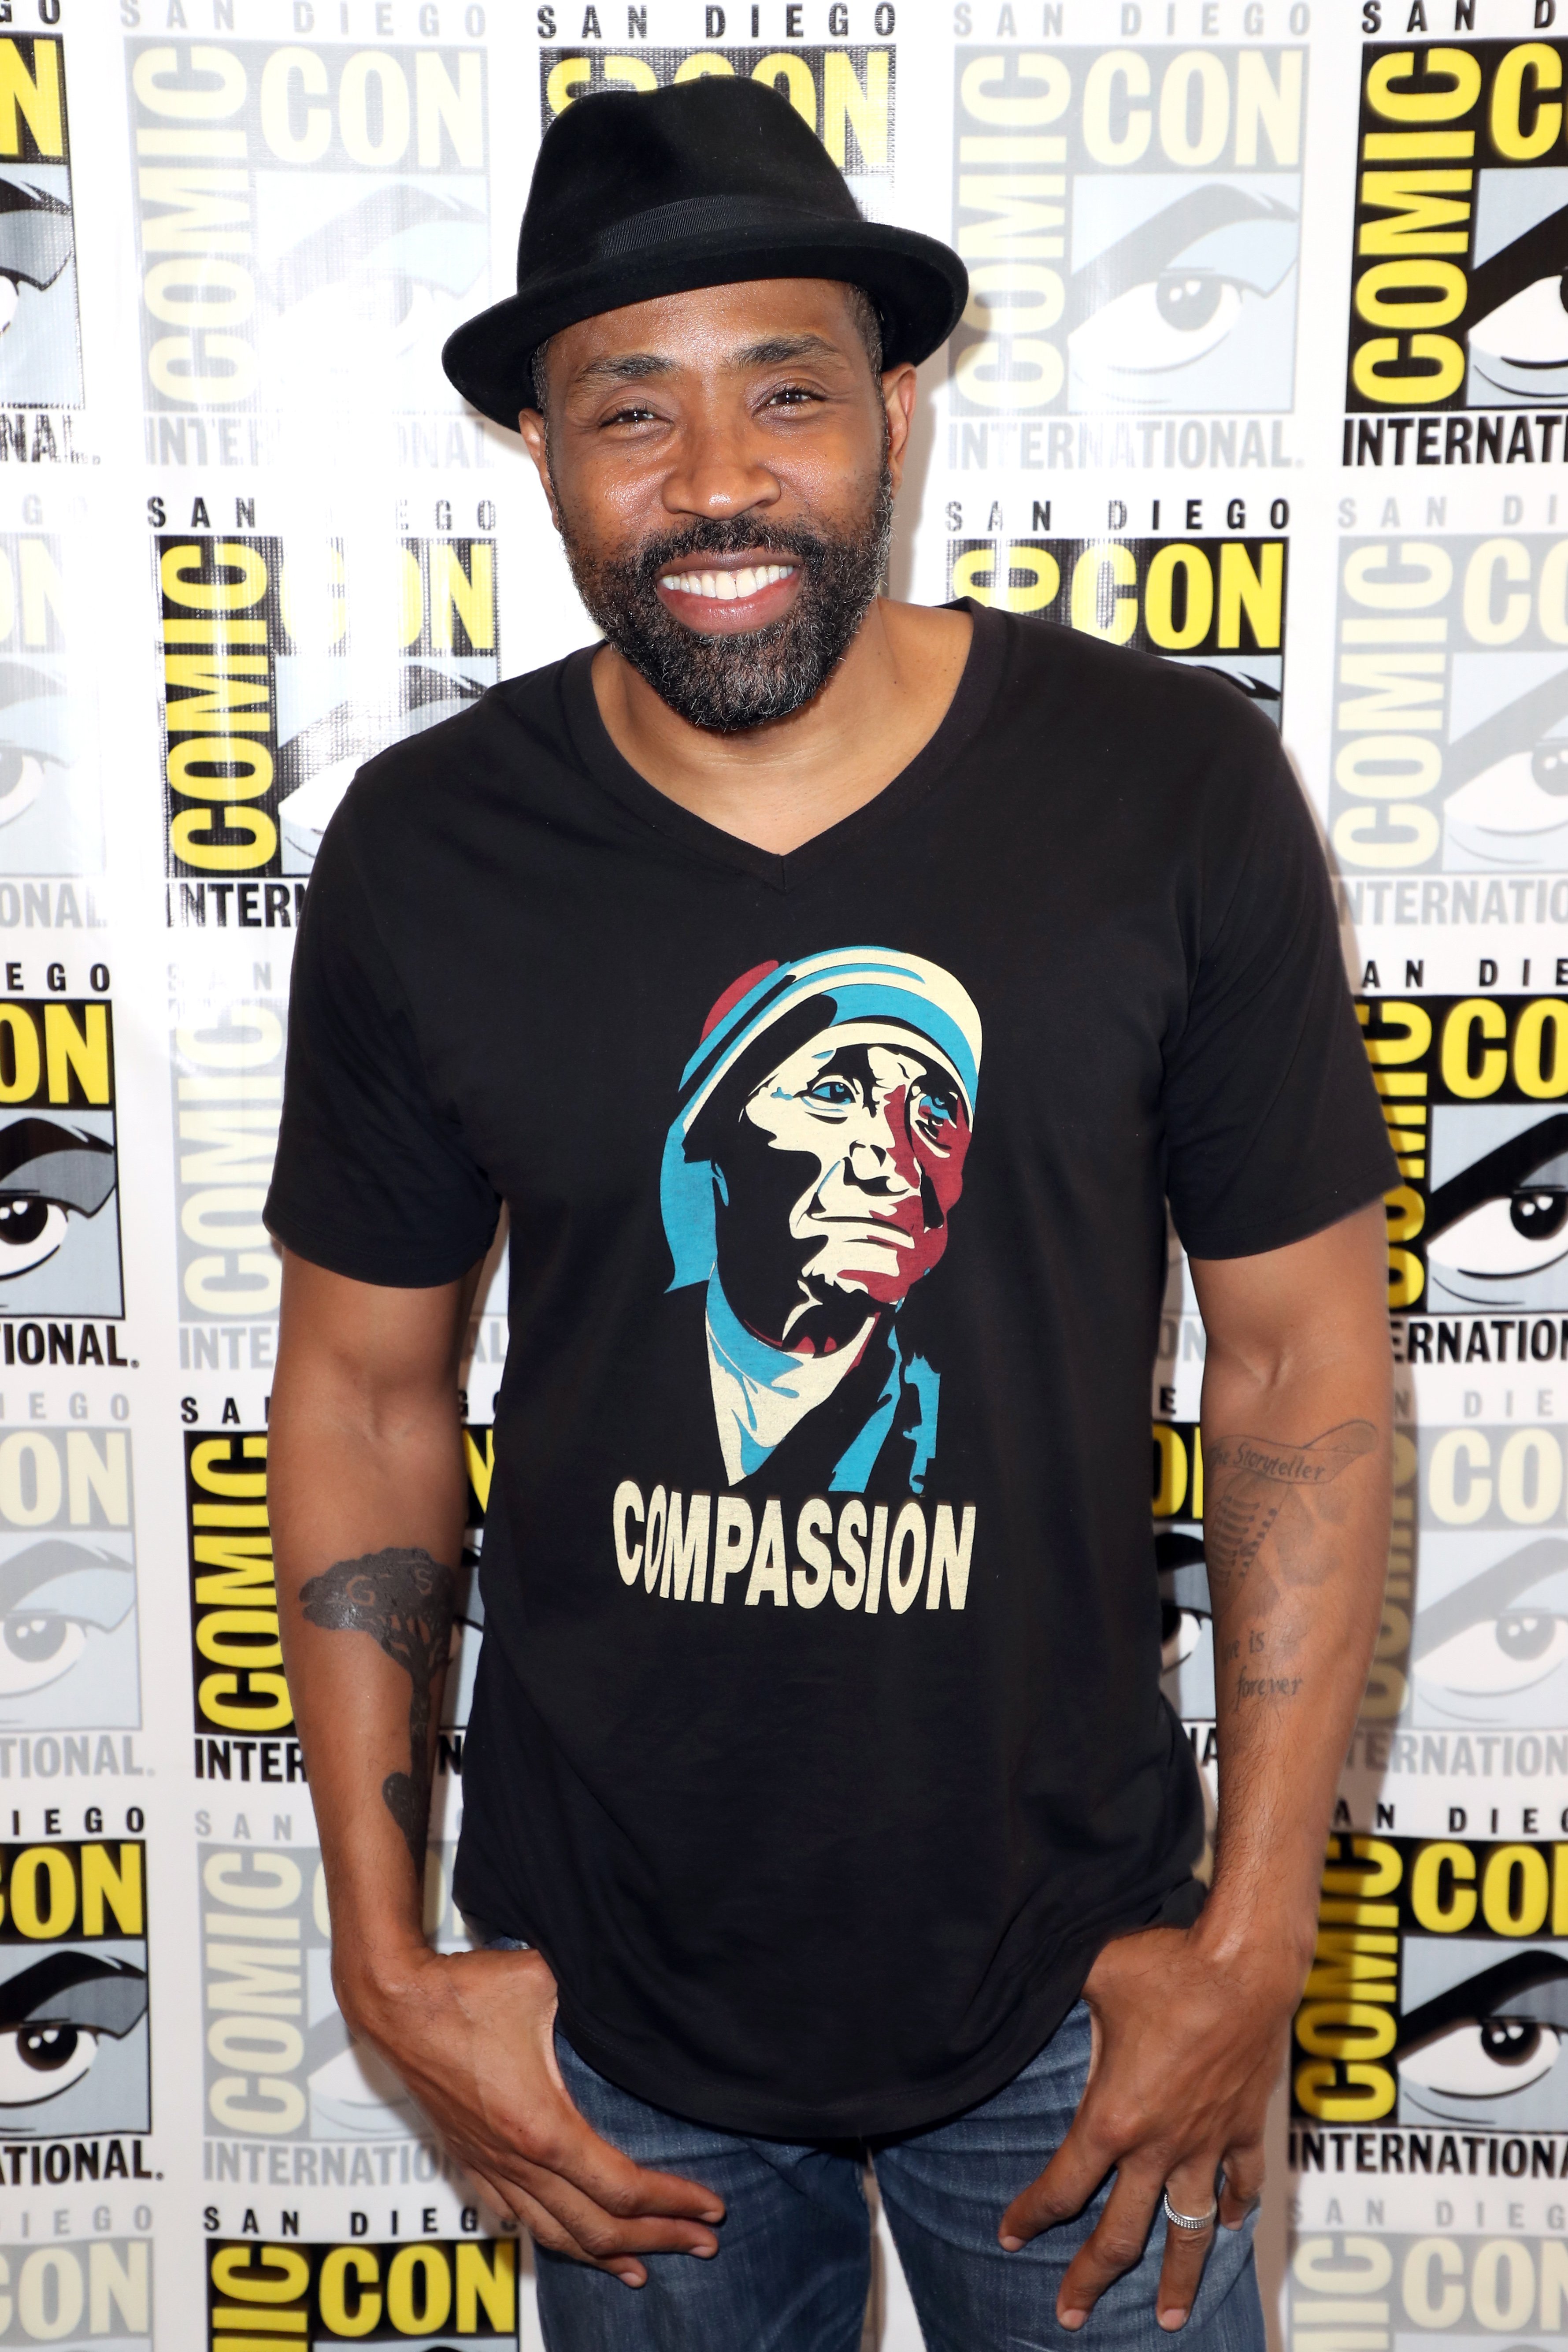 Cress Williams attends the "Black Lightning" press conference at the International 2018 on July 21, 2018, in San Diego, California. | Source: Getty Images